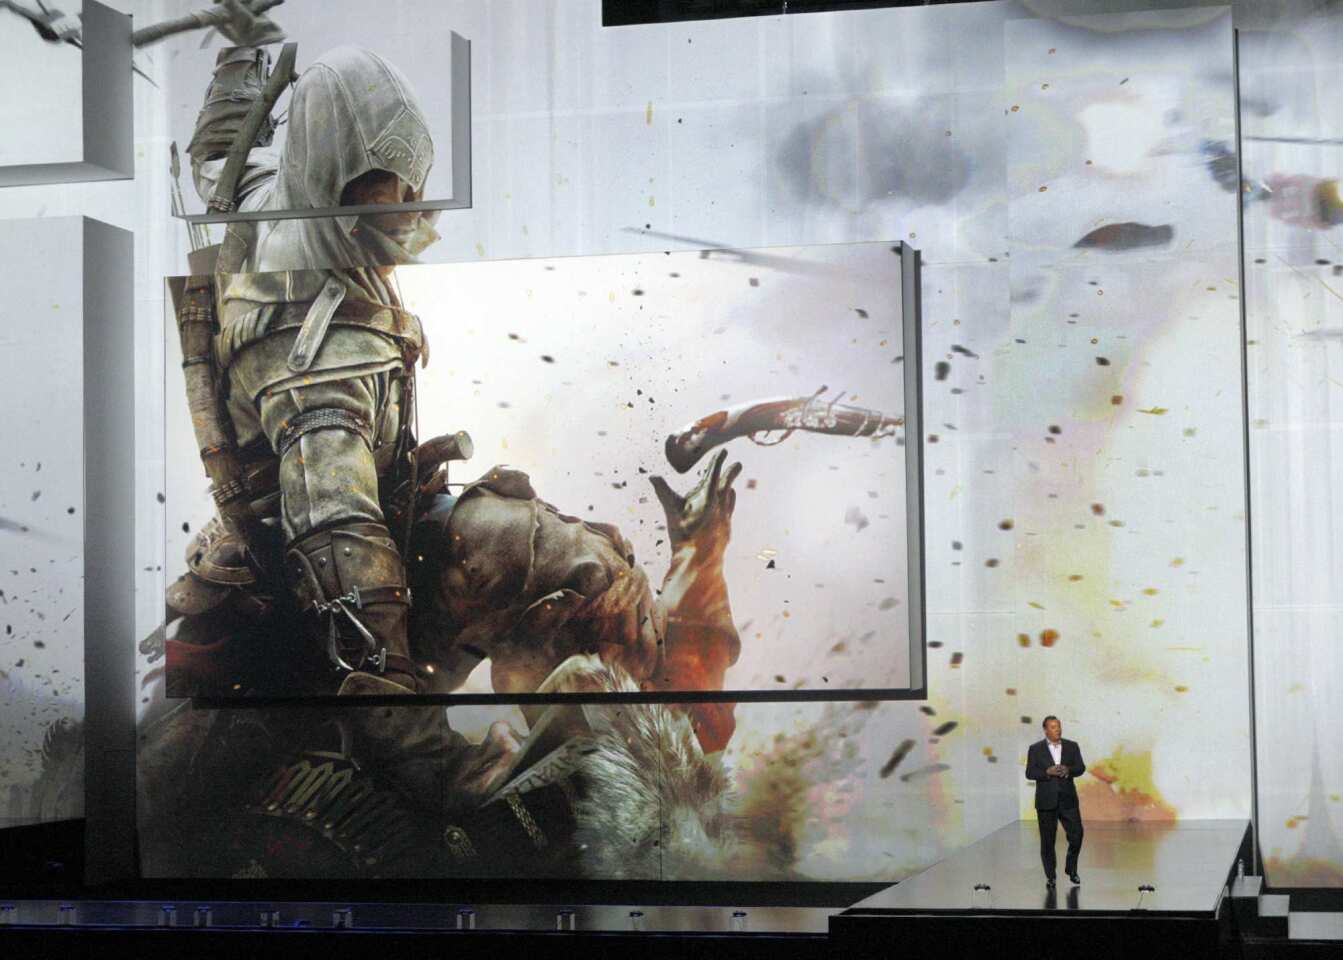 Assassin Creed III Liberation on Sony console